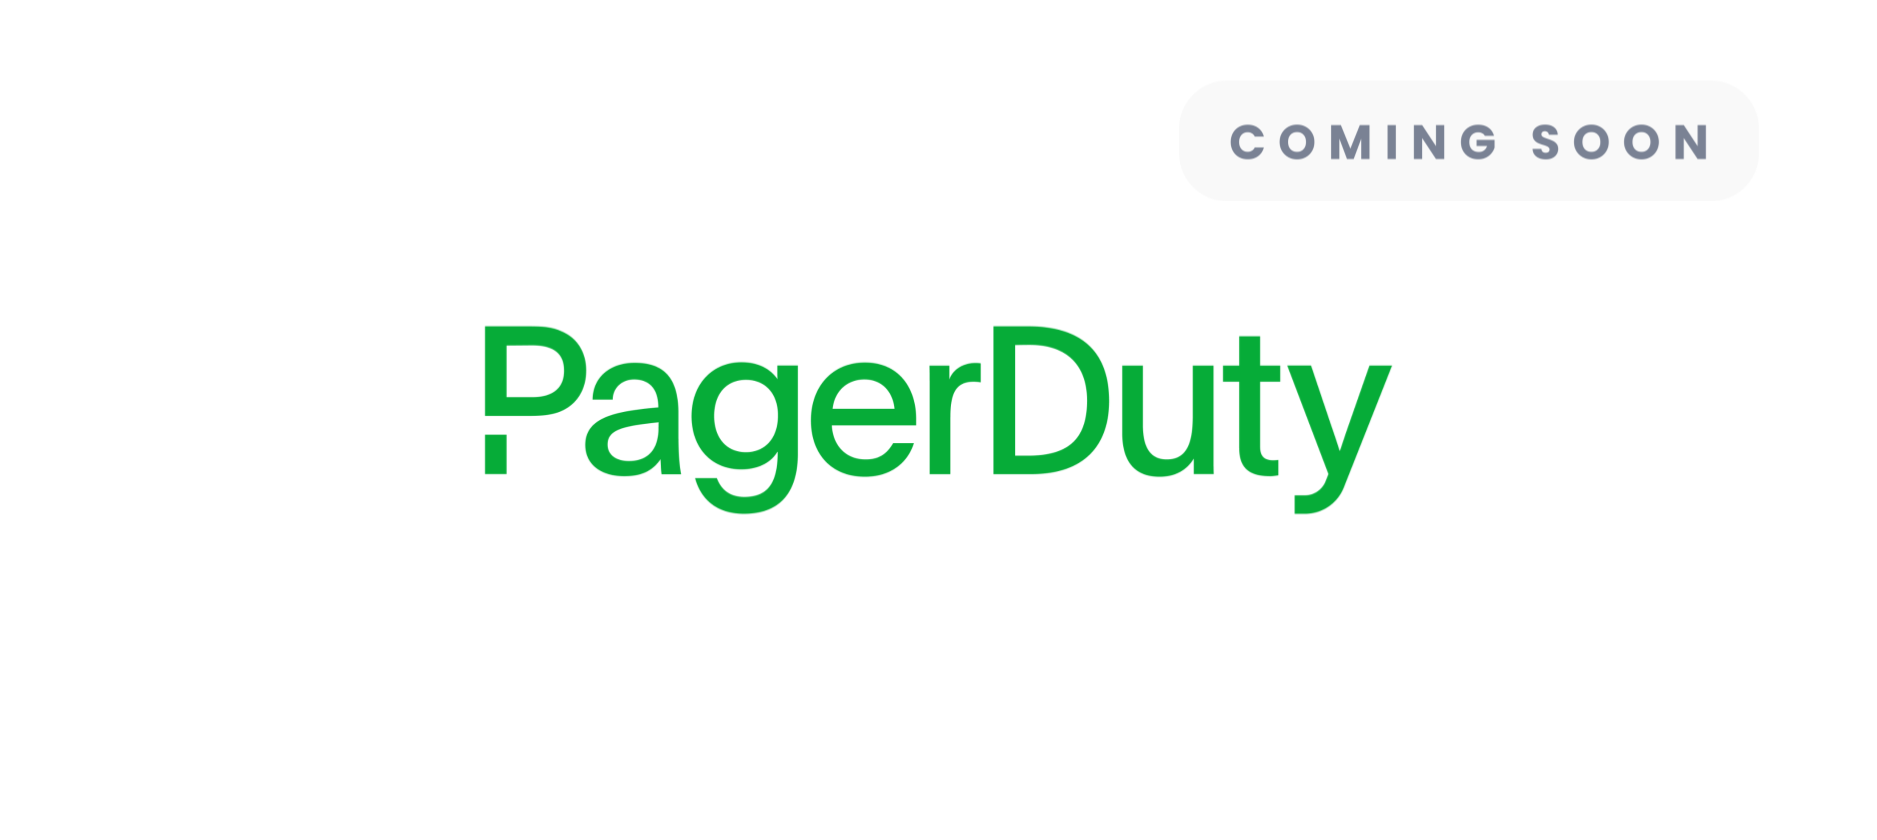 Communication - PagerDuty - Coming soon